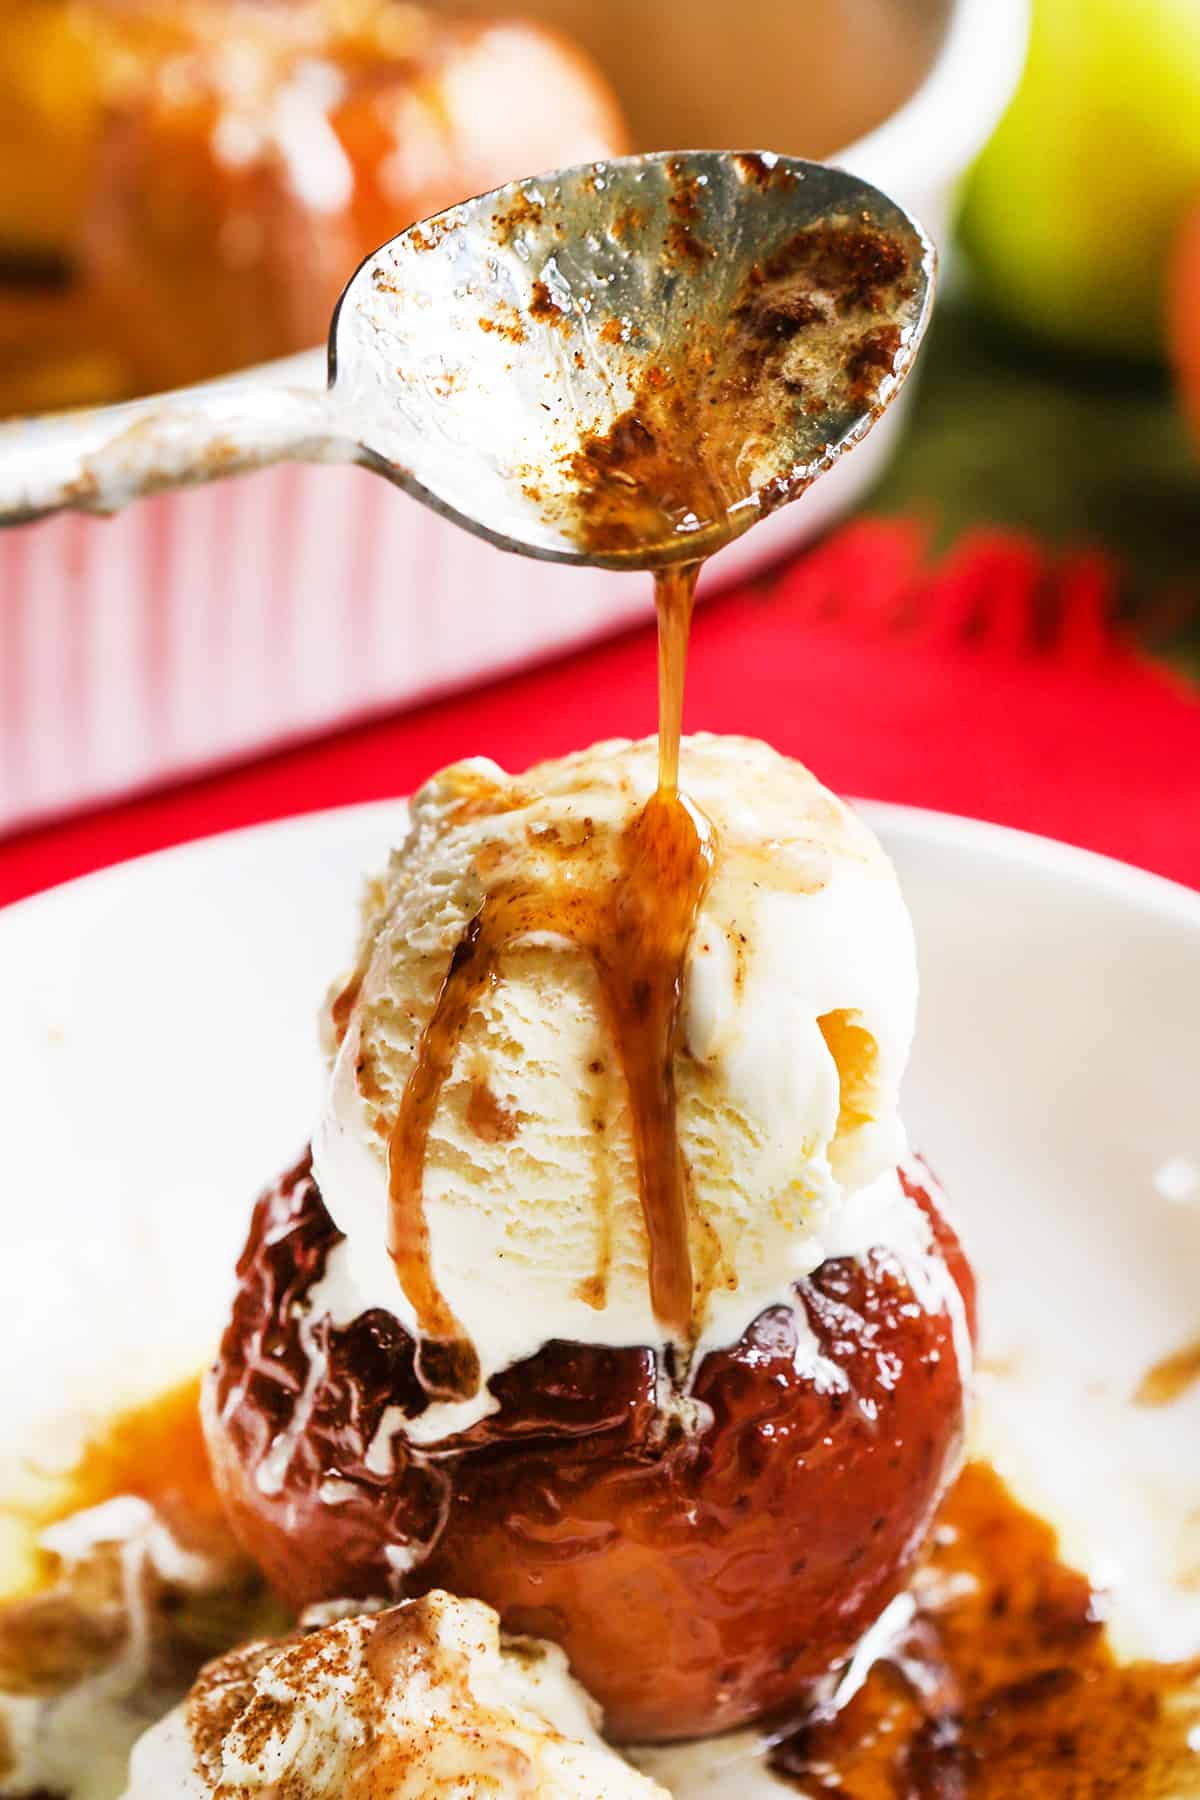 Spoon drizzling caramel over the top of icecream over a baked apple.